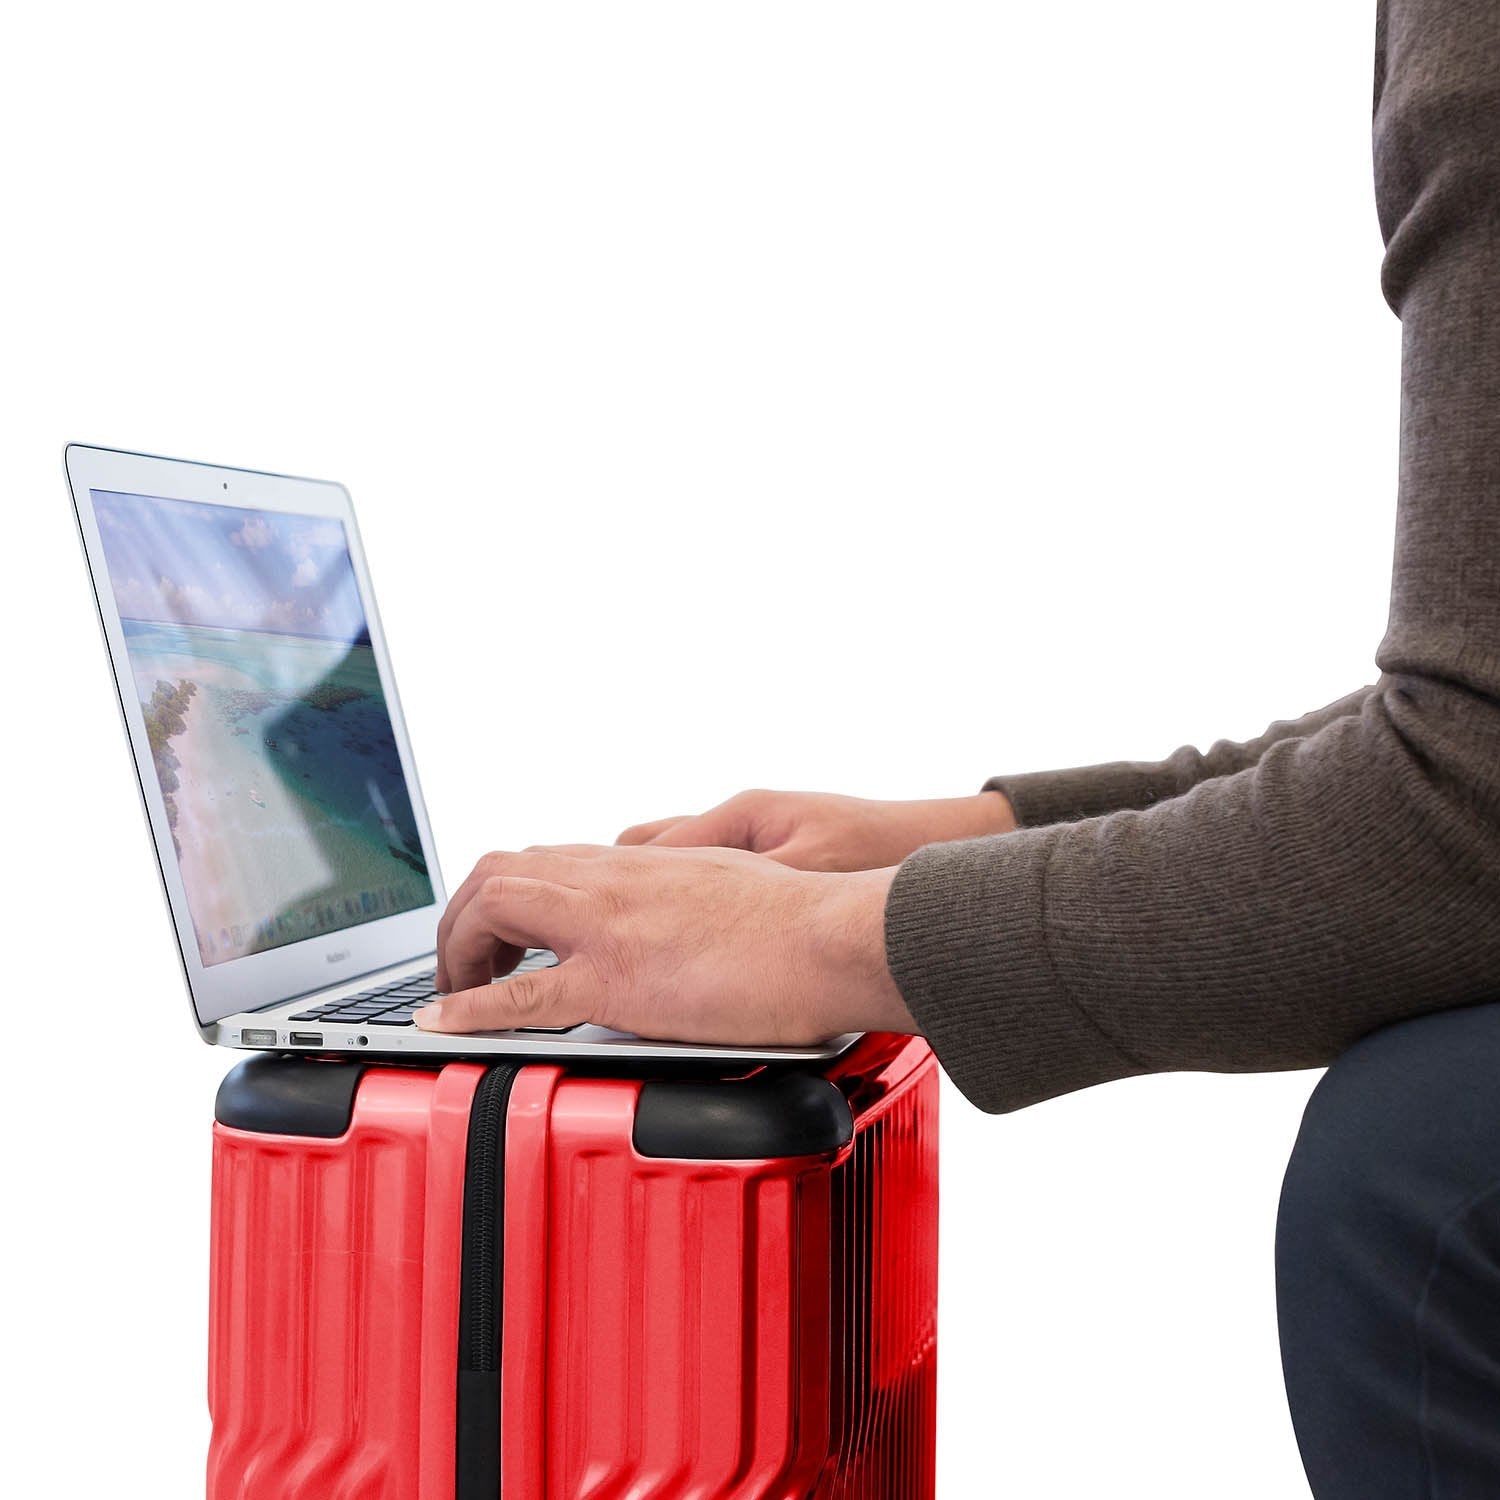 4TH OF JULY SPECIAL OFFER 2024 Tekno 21" Carry-on - Red